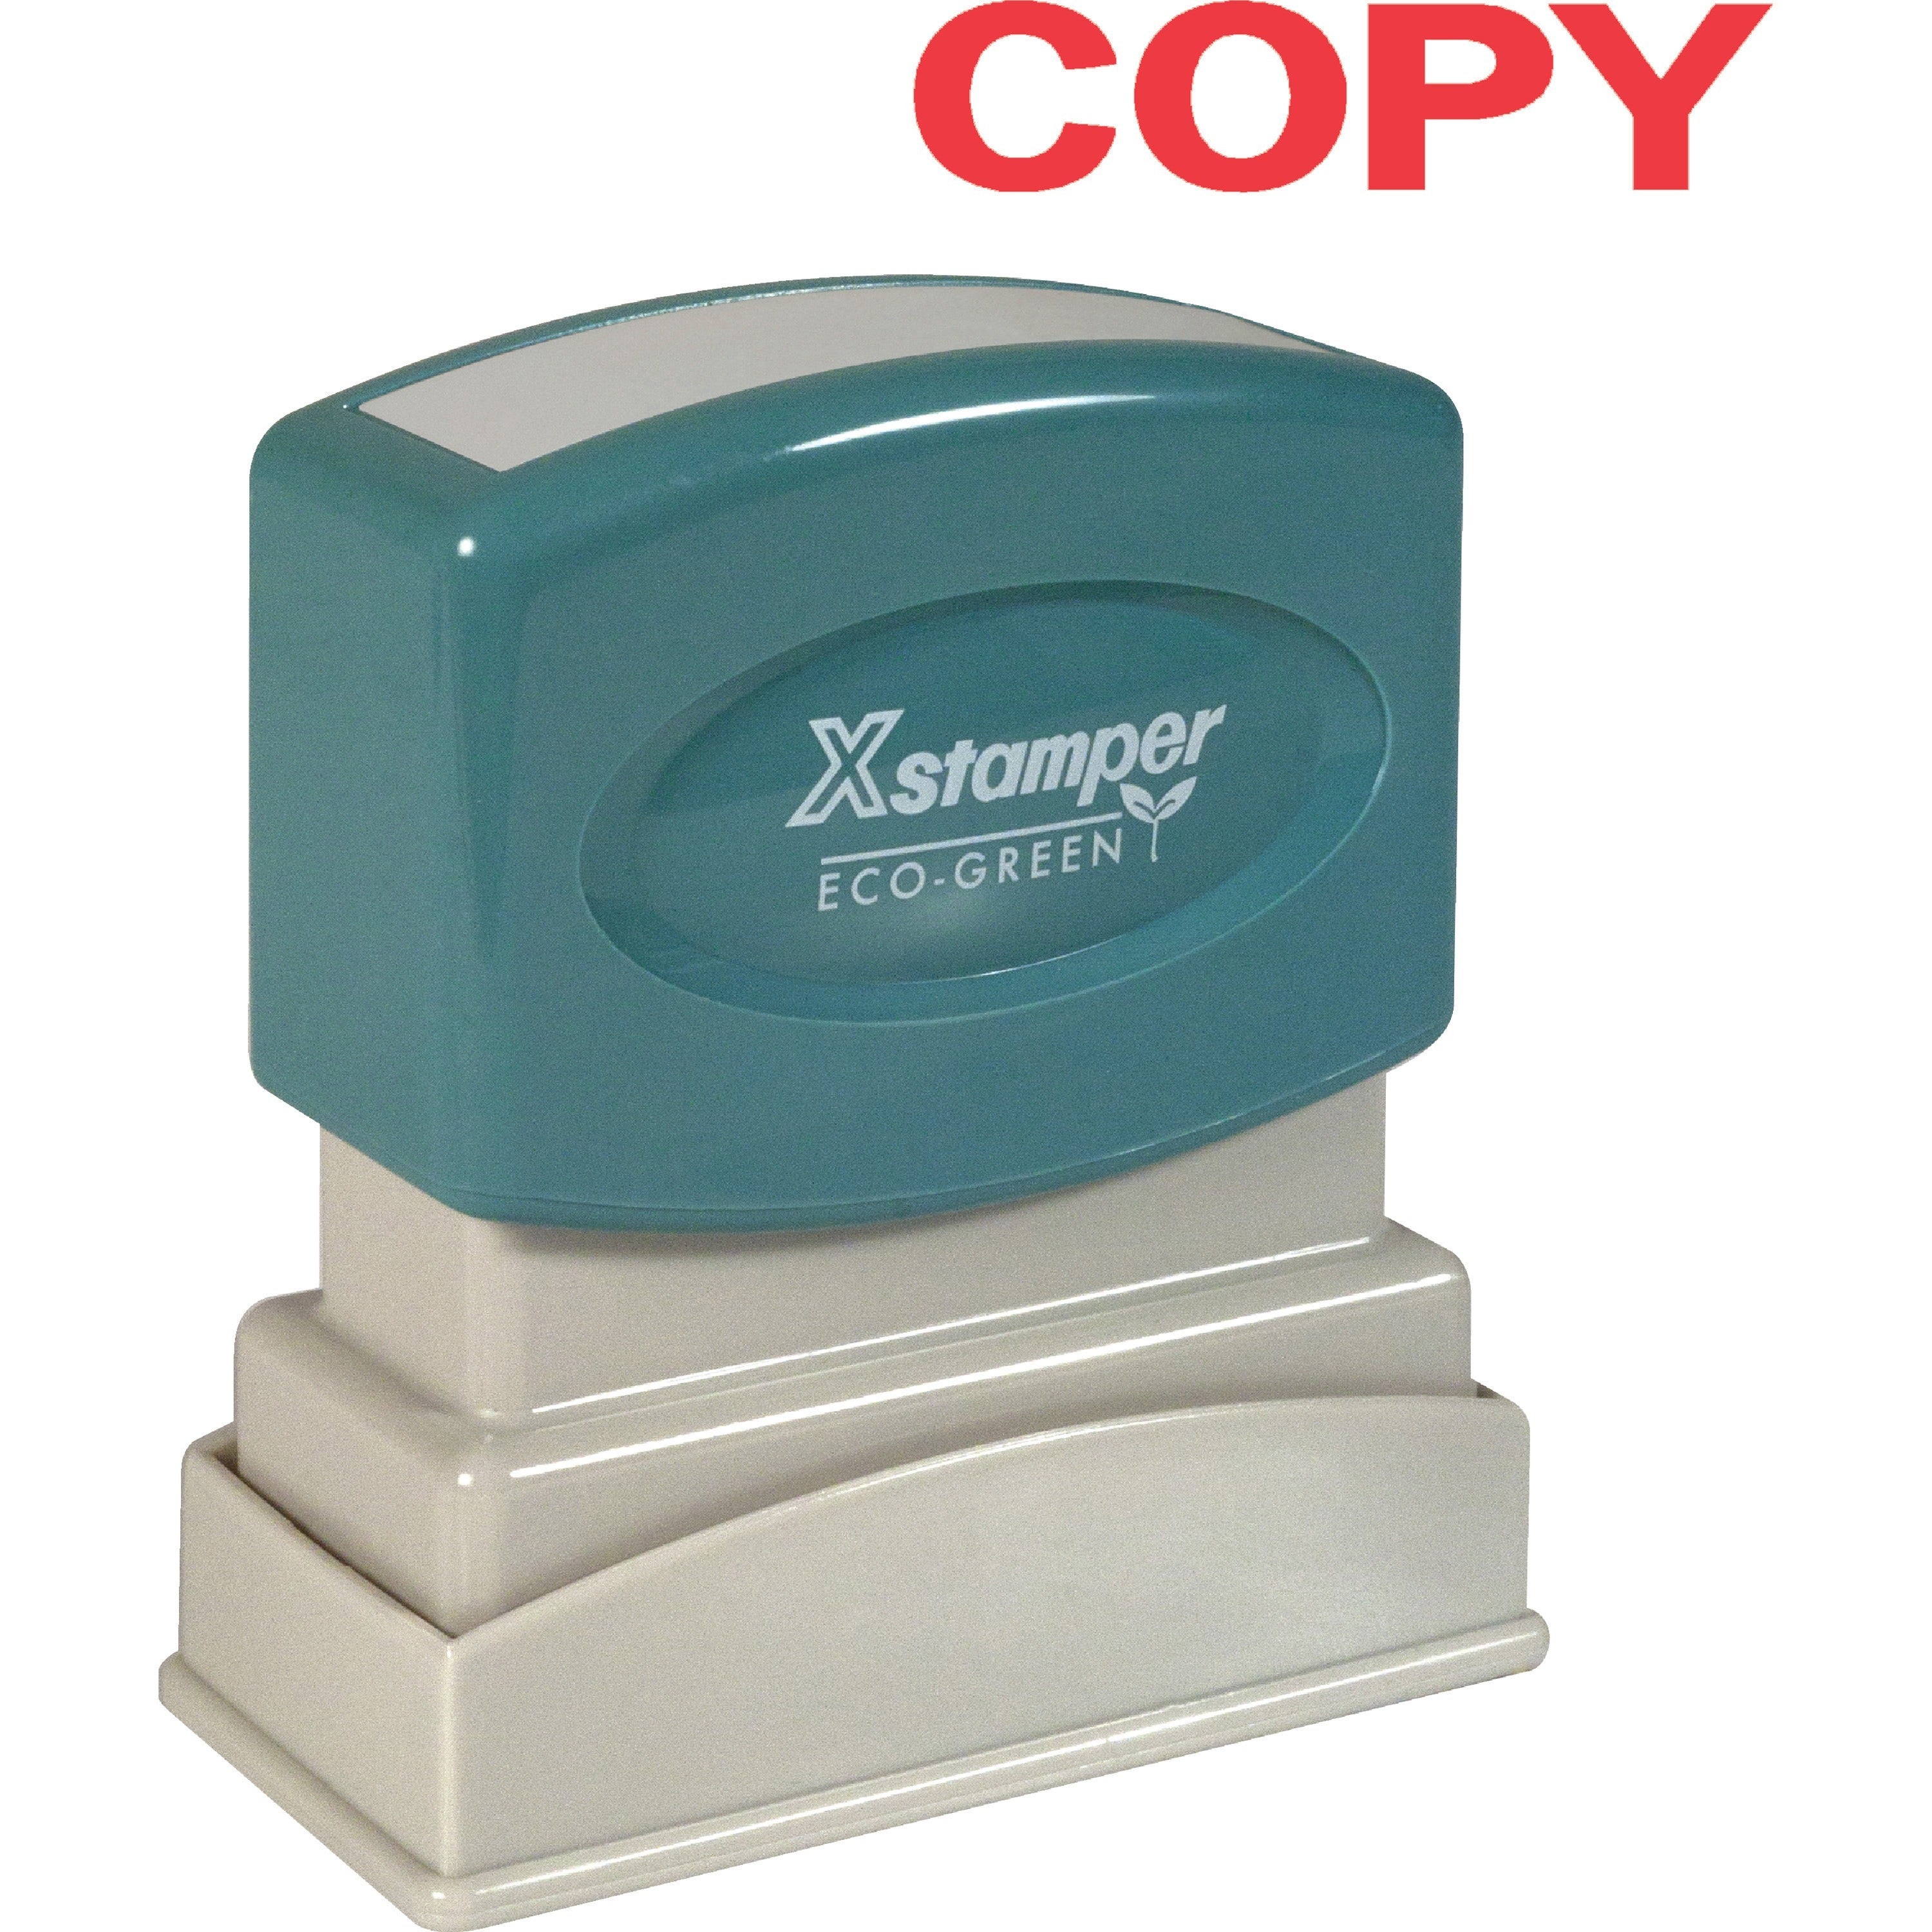 Xstamper COPY Title Stamps - Message Stamp - "COPY" - 0.50" Impression Width x 1.62" Impression Length - 100000 Impression(s) - Red - Recycled - 1 Each - 